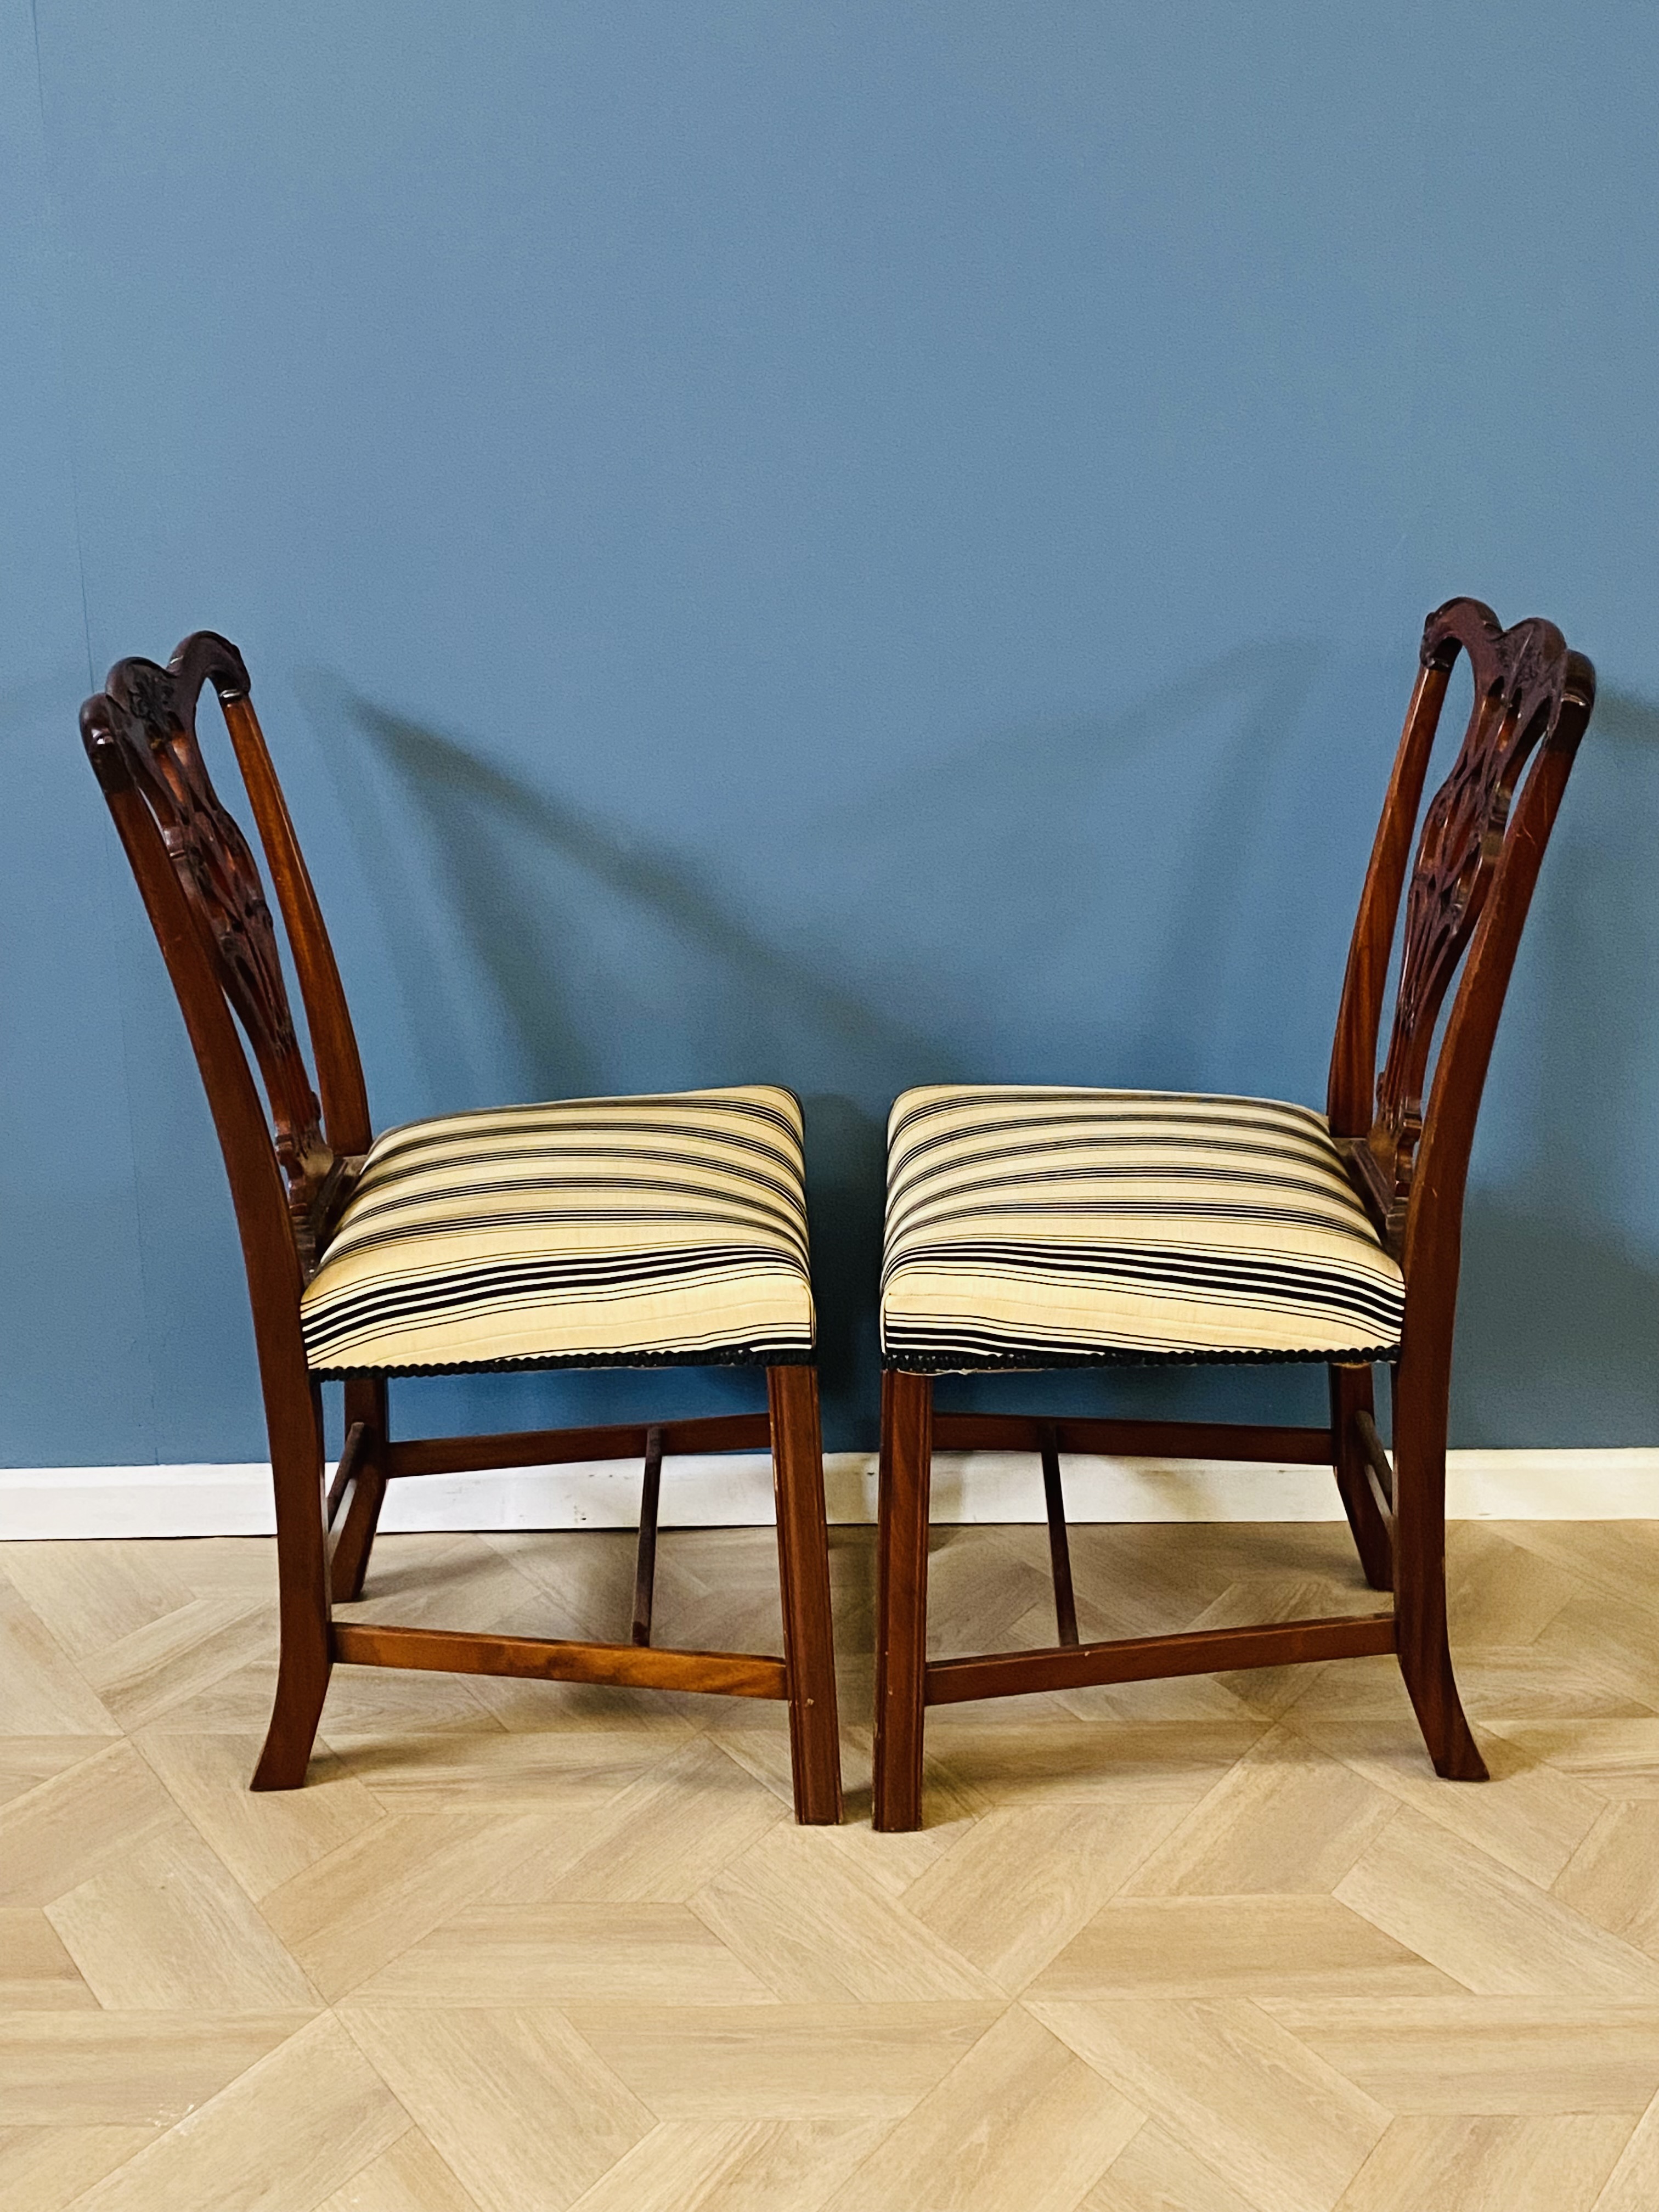 Pair of mahogany Chippendale style side chairs - Image 5 of 5